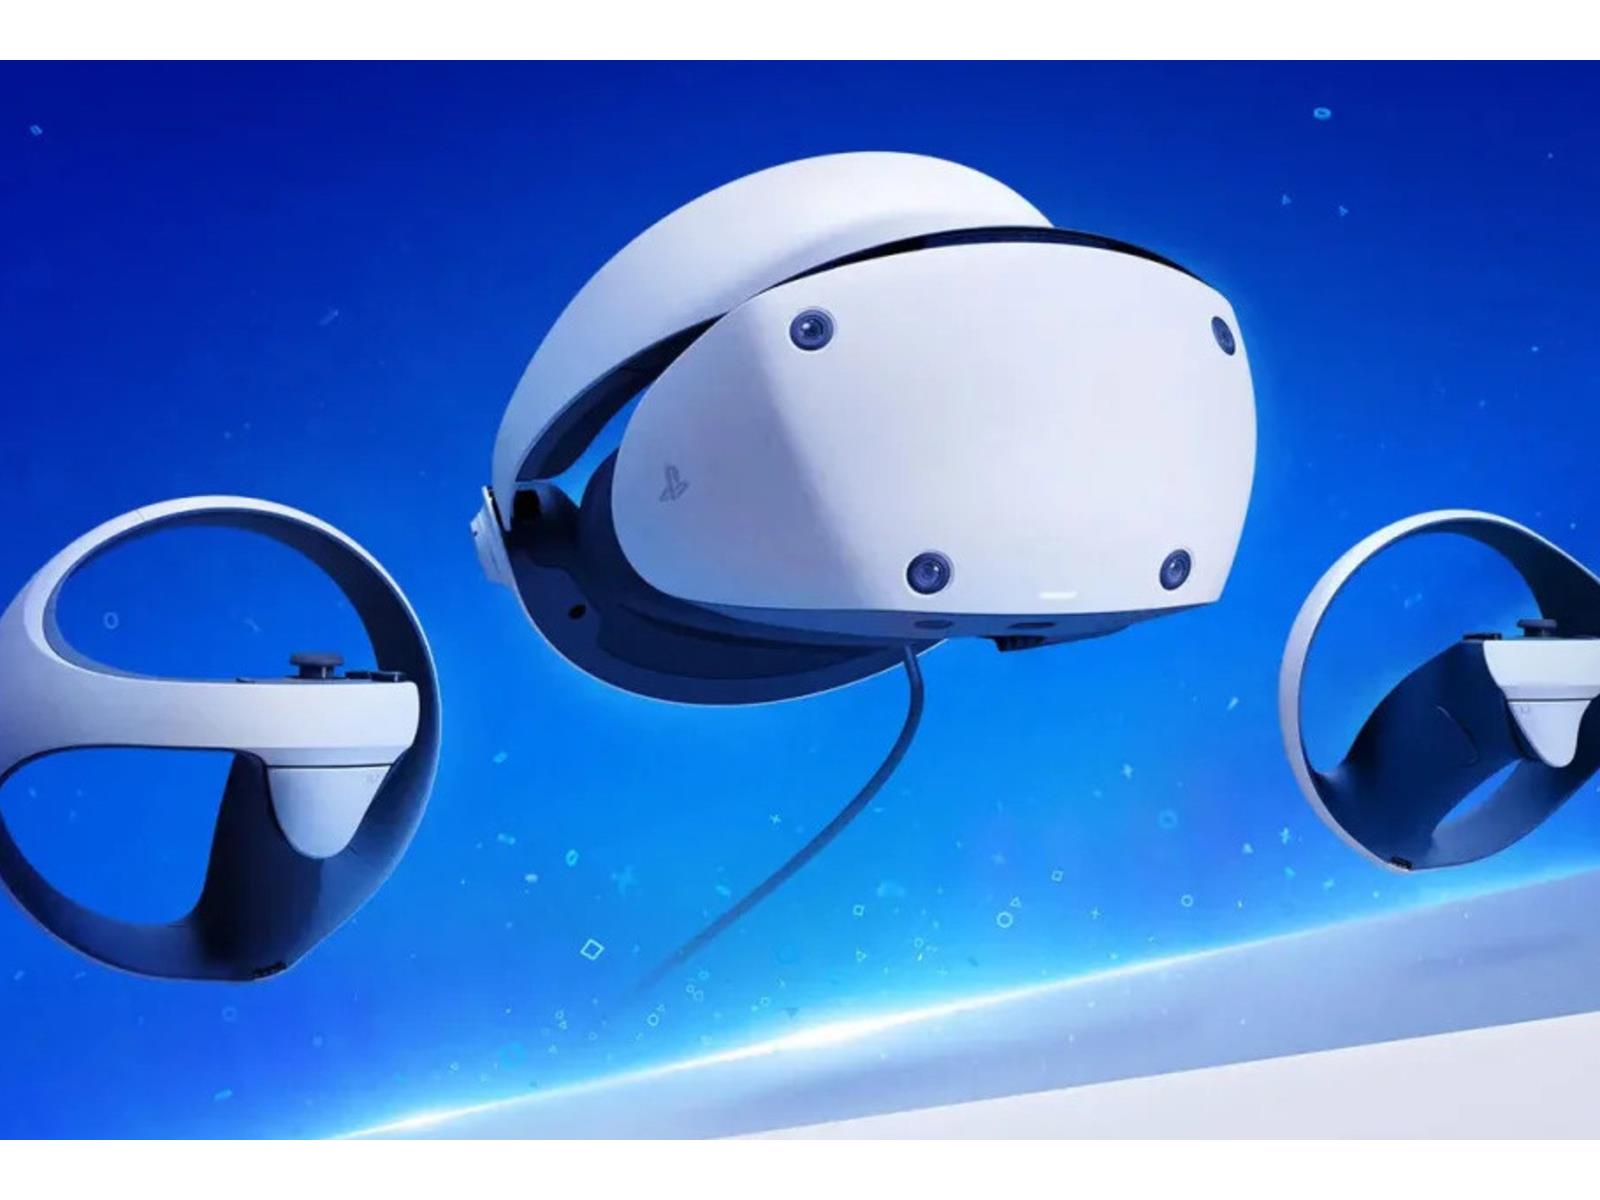 Sony Reveals Surprising PlayStation VR2 Sales For PS5 And Exciting